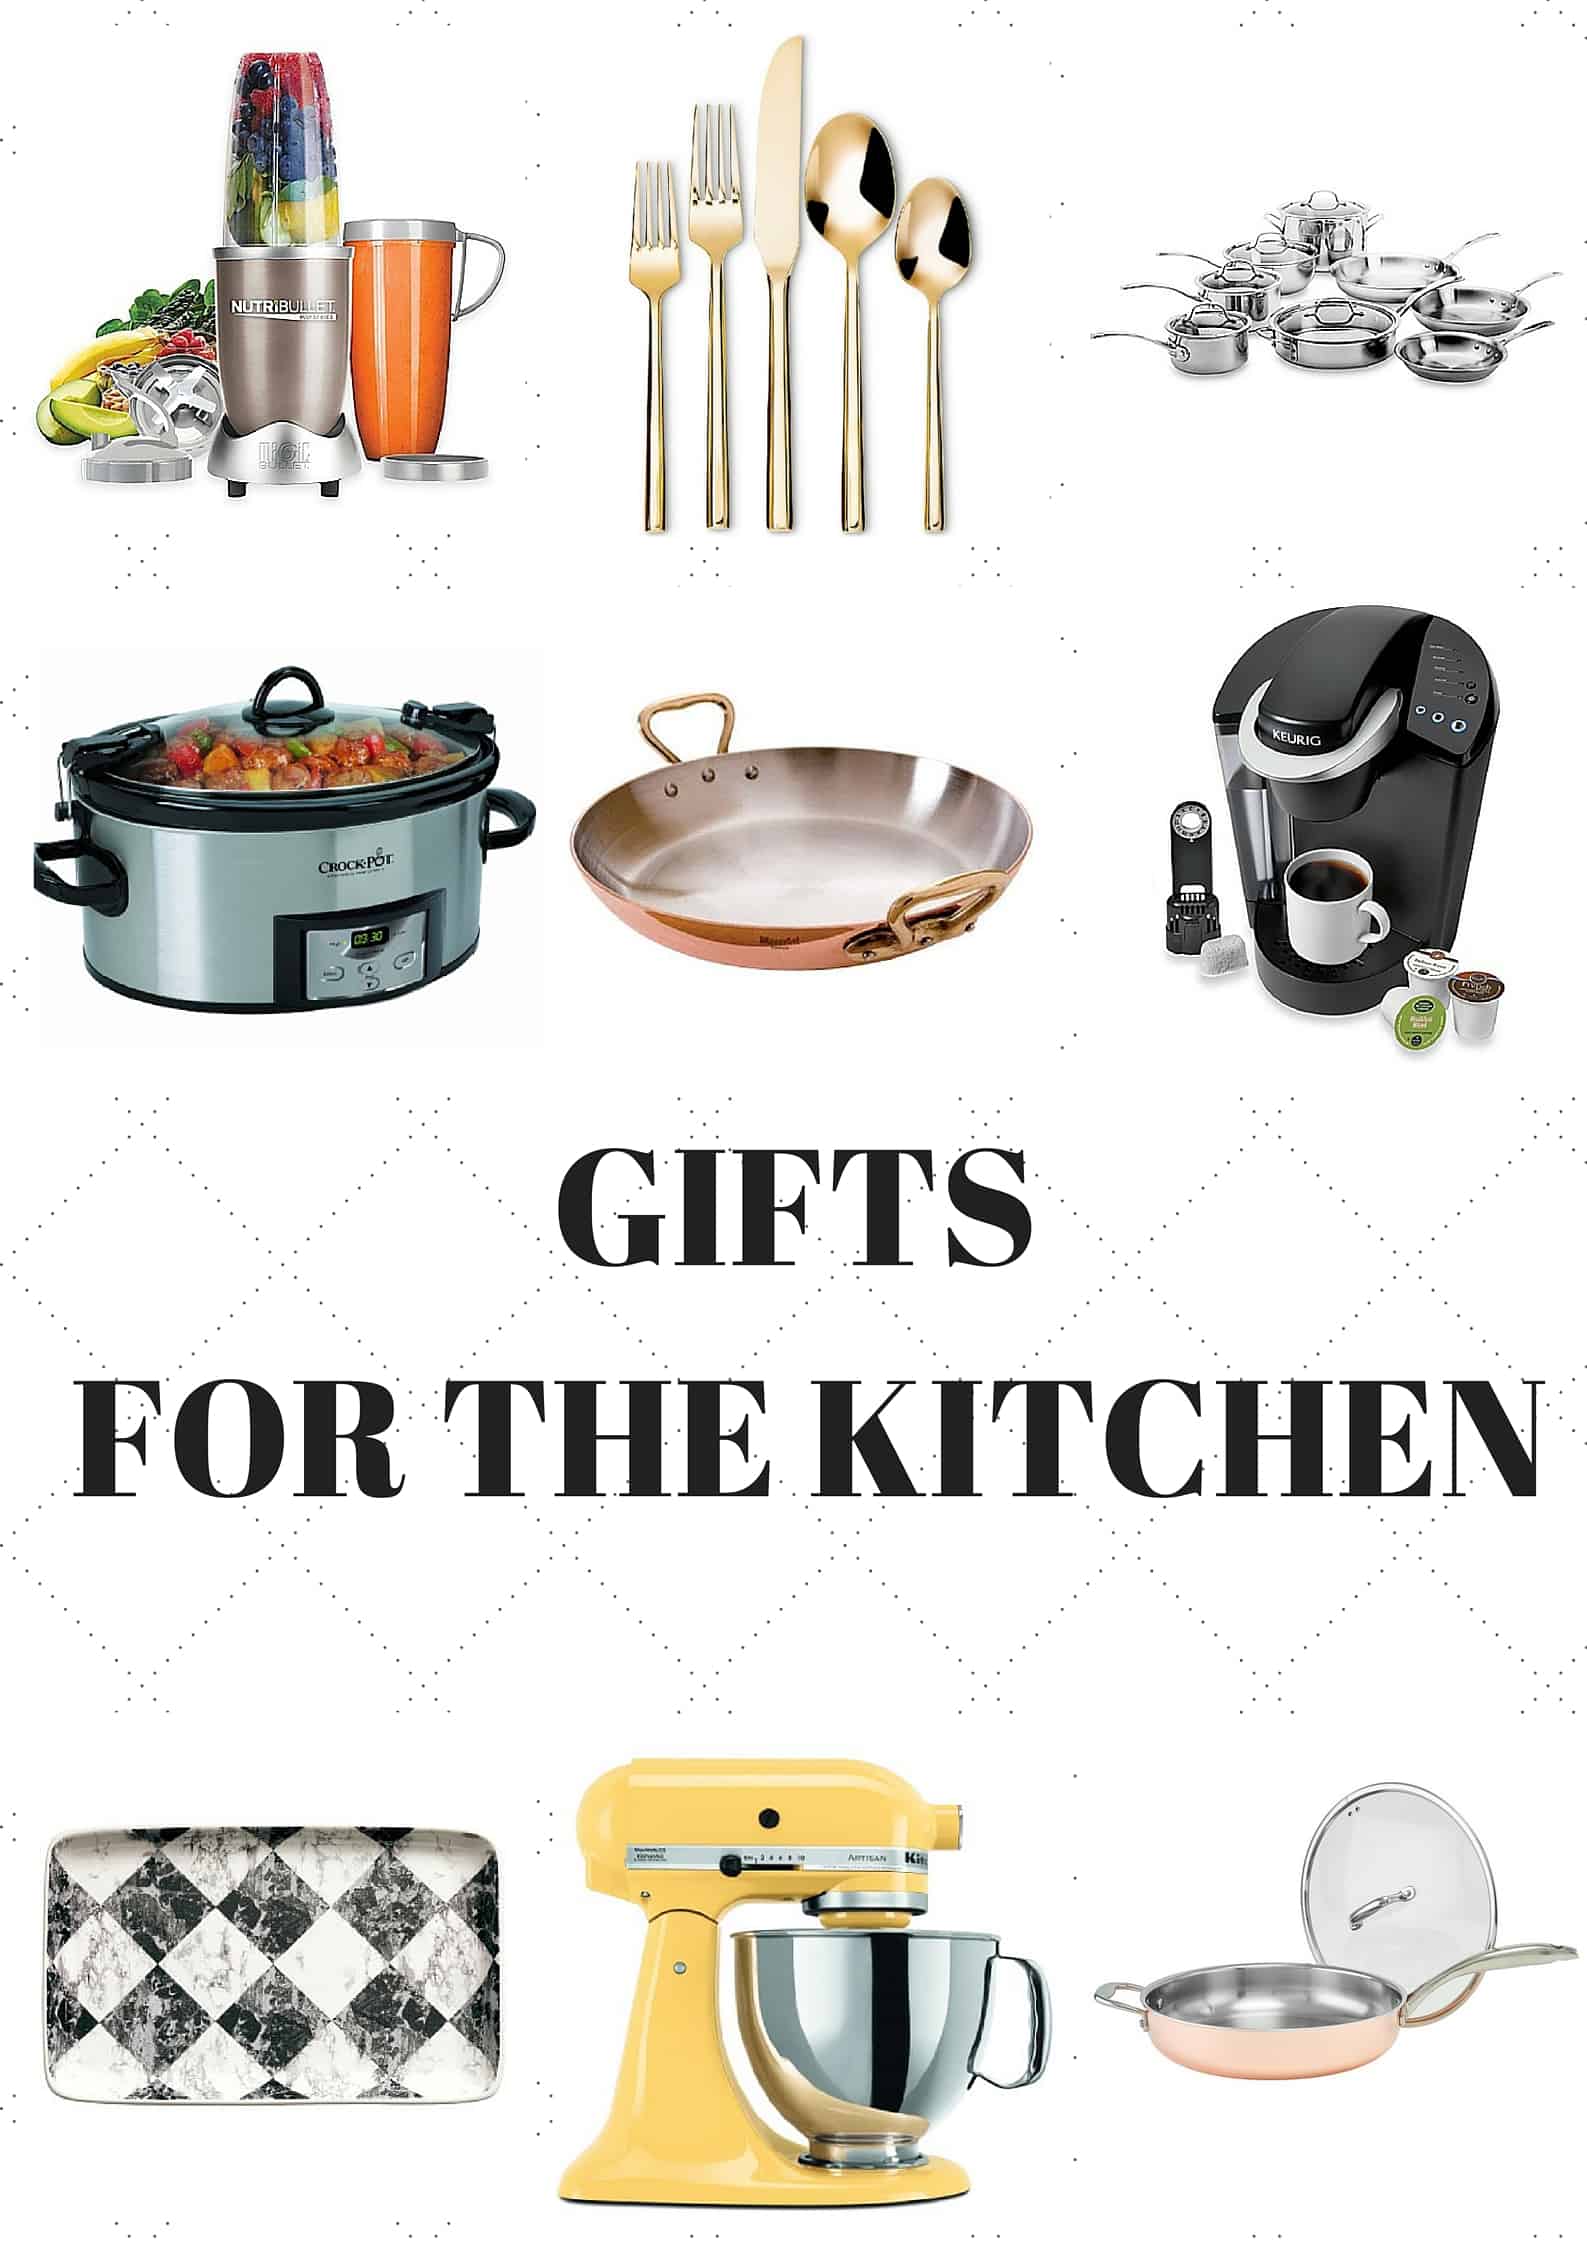 GIFTS FOR THE KITCHEN